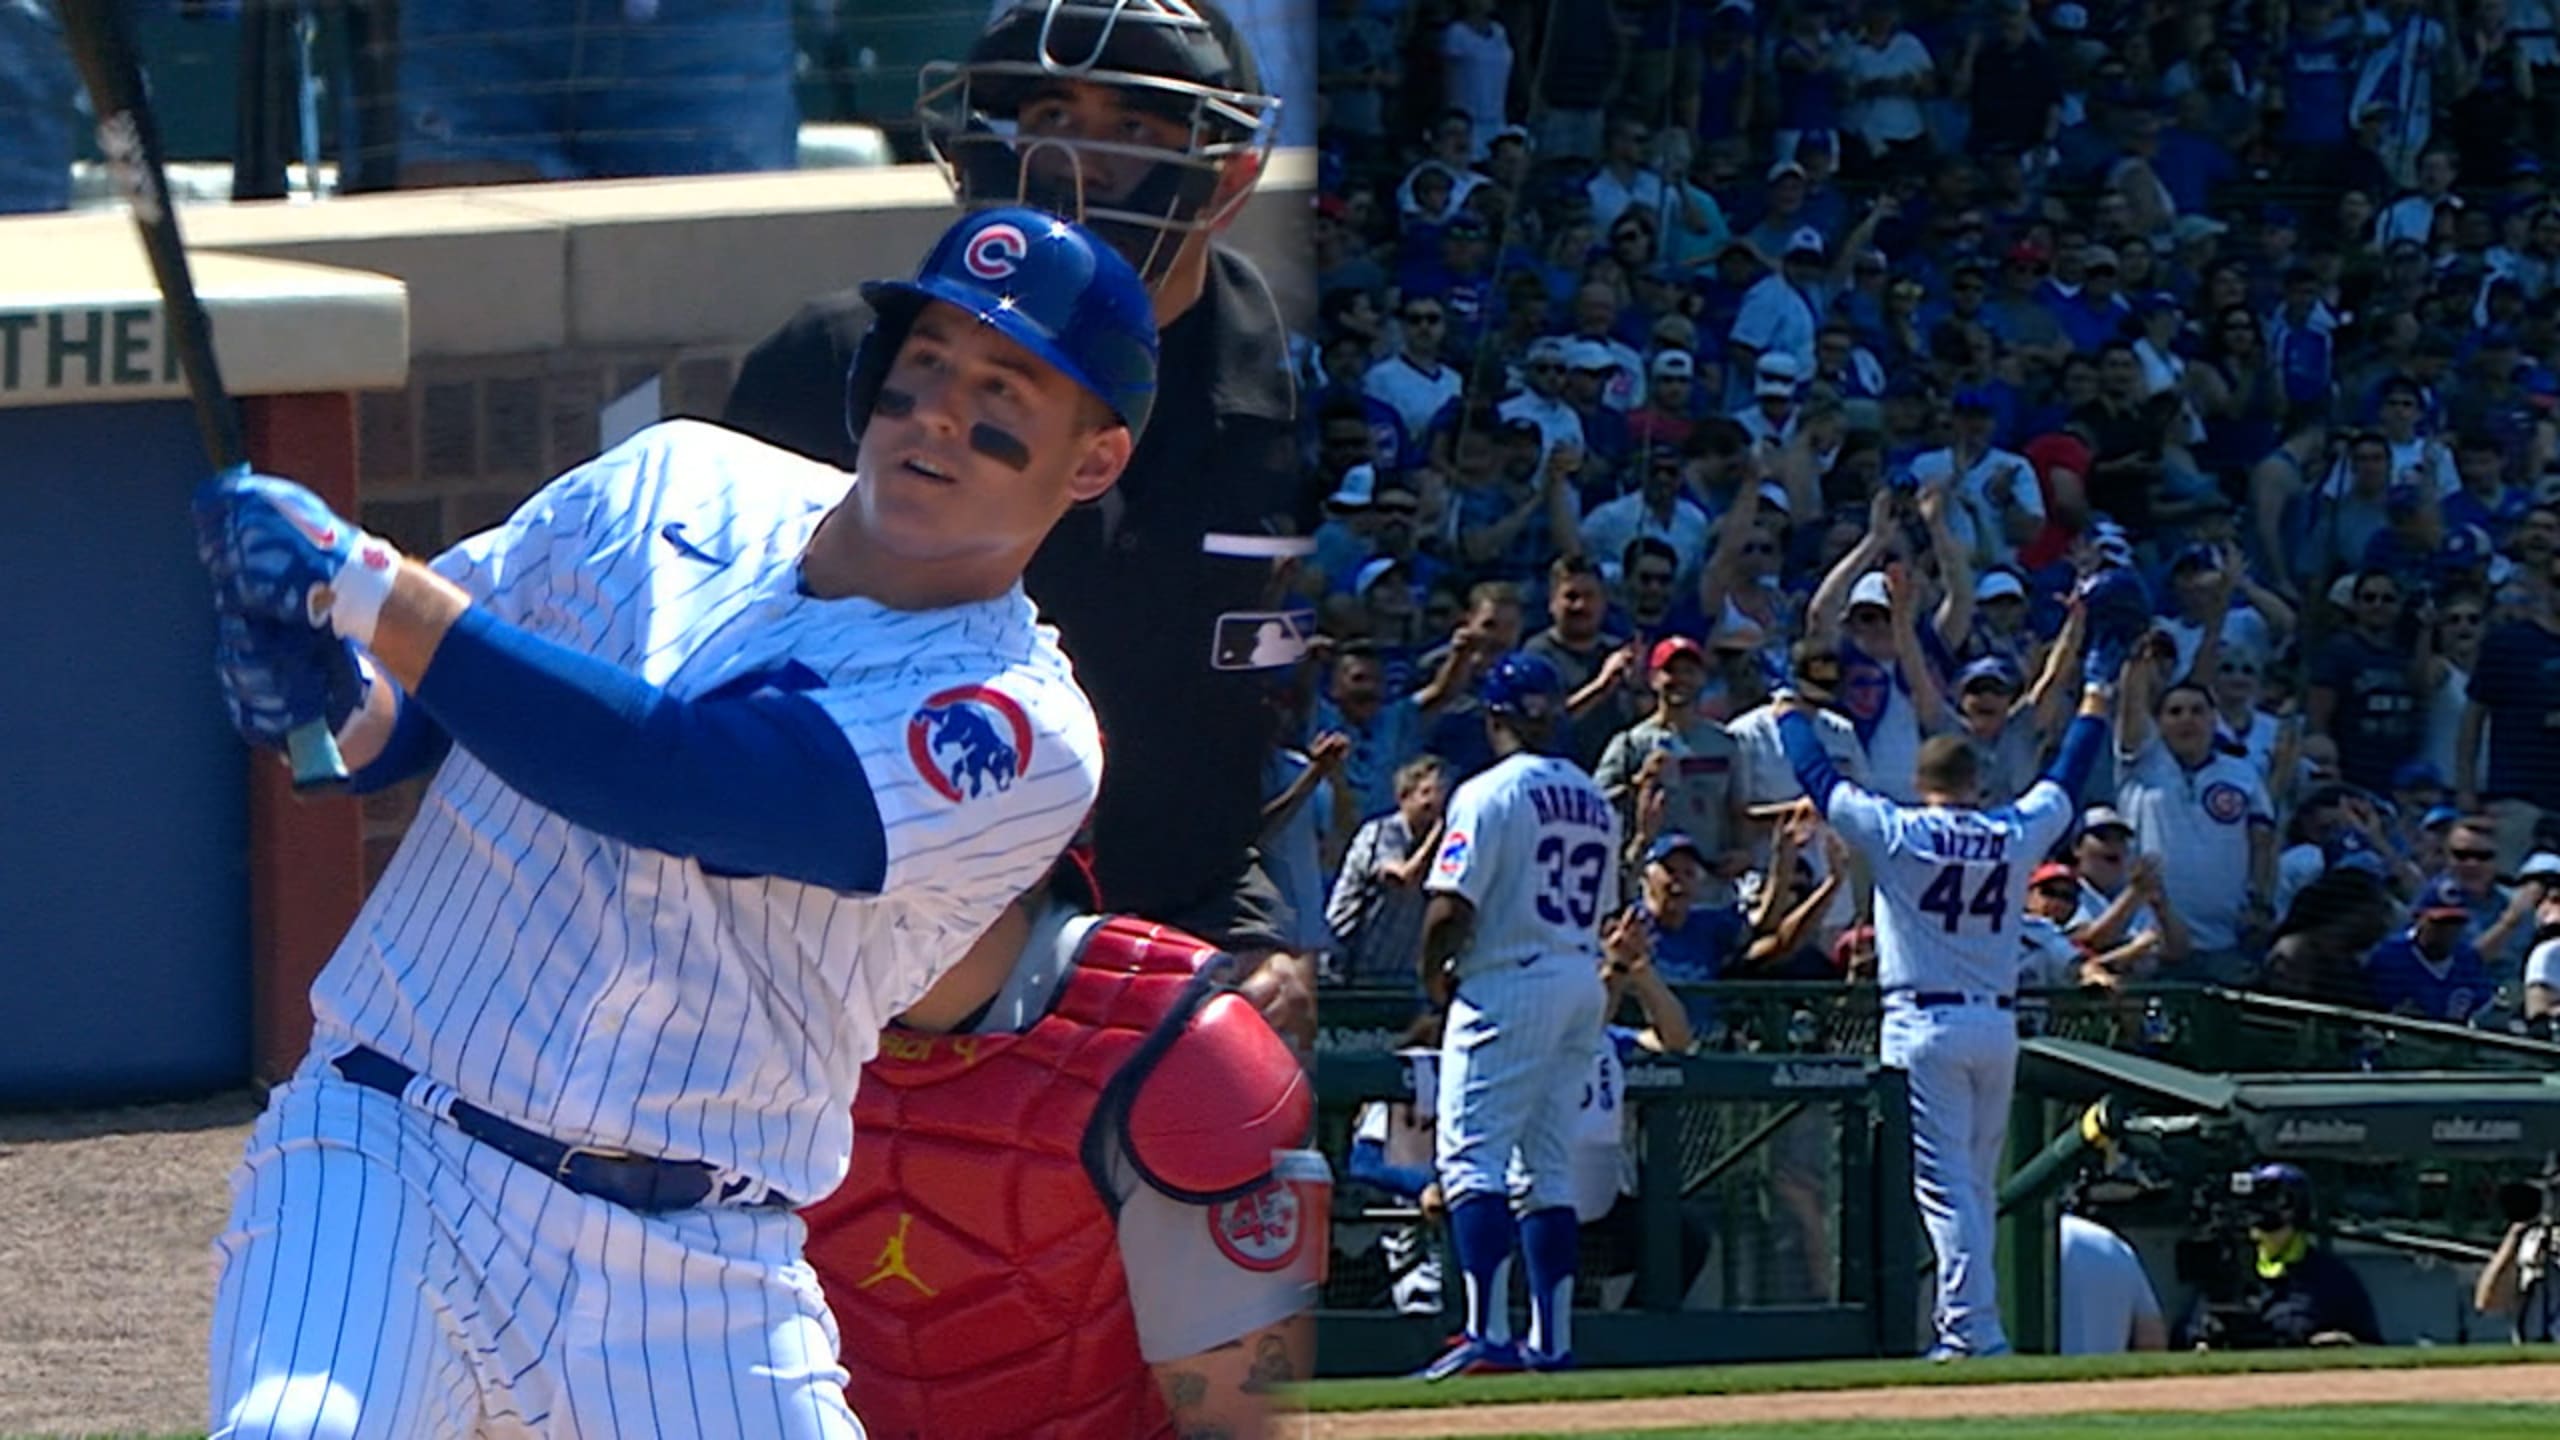 BEST AT-BAT OF THE YEAR?! Anthony Rizzo goes DEEP after FOURTEEN pitch AB!  